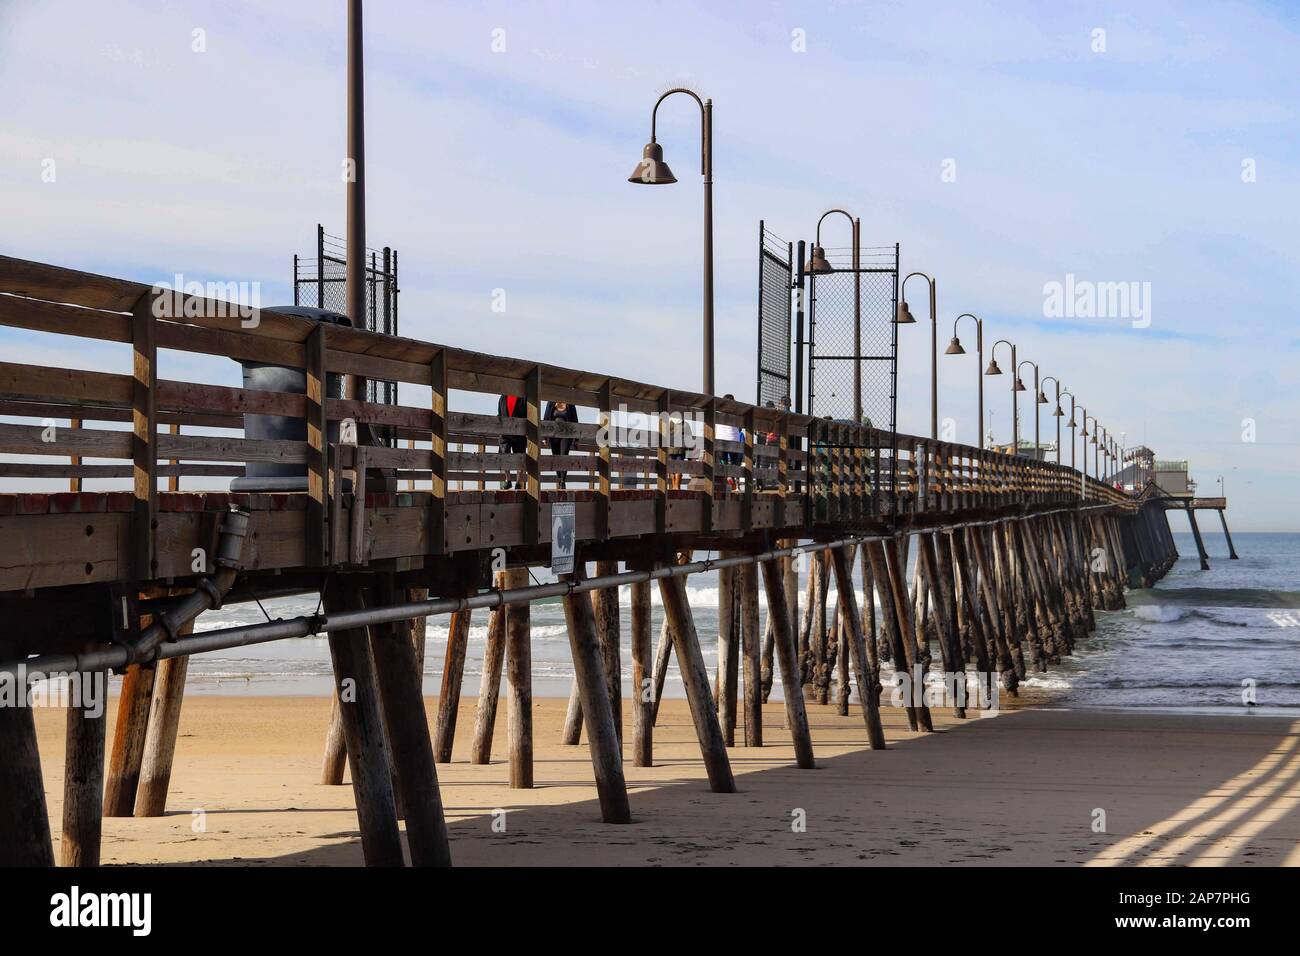 The wooden Imperial Beach pier in Imperial Beach CA Stock Photo